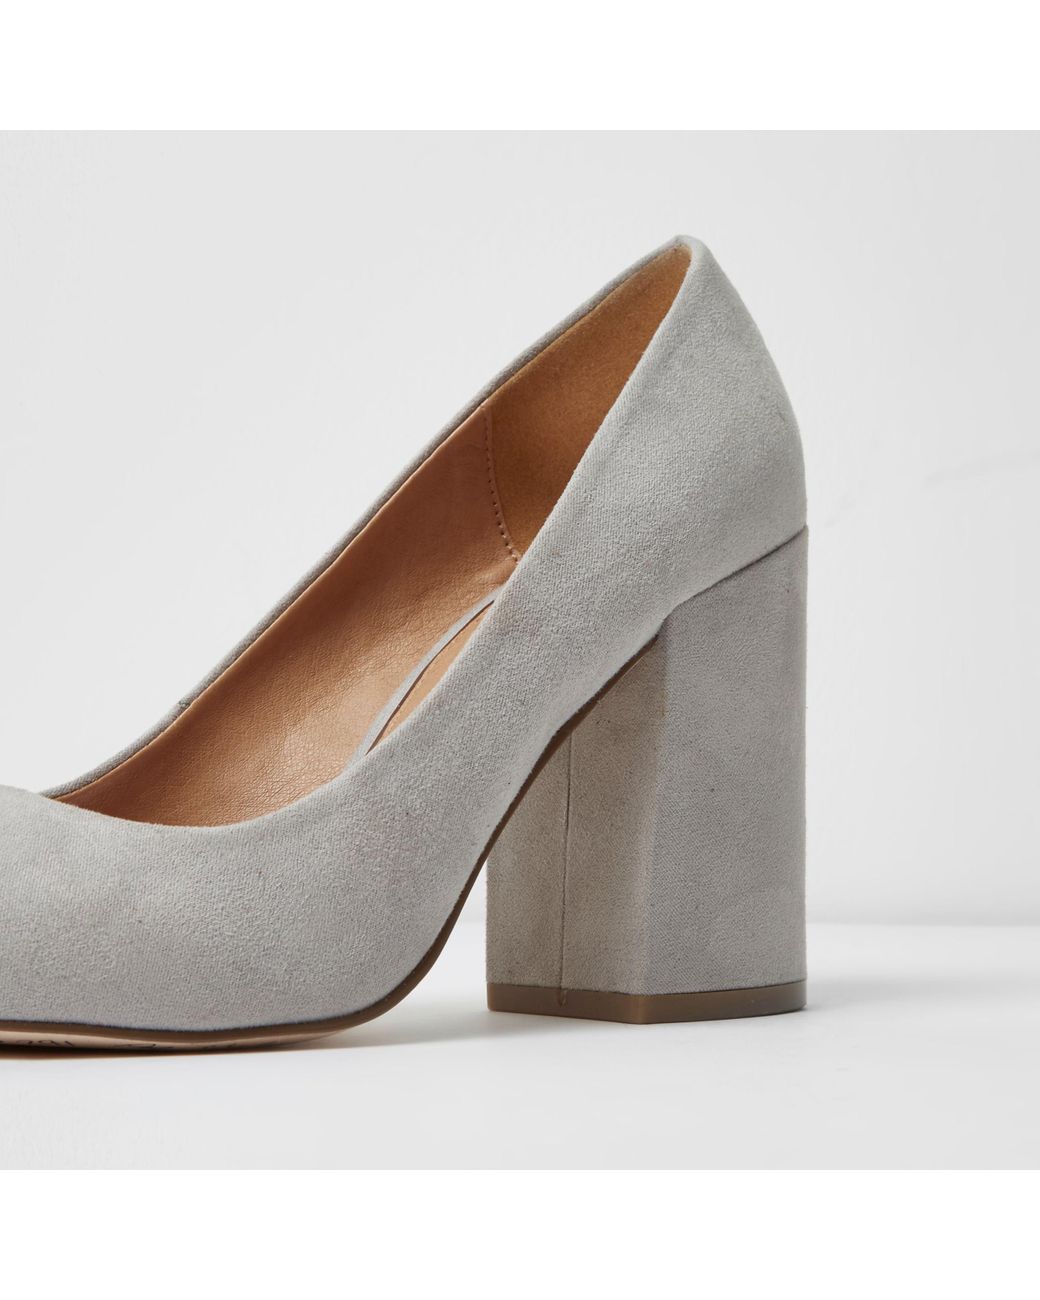 Amazon.com: Closed Toe Heels for Women Heels Closed Round Toe Chunky Block  Pumps Shoes Womens Closed Toe Shoes (Grey, 7.5) : Clothing, Shoes & Jewelry